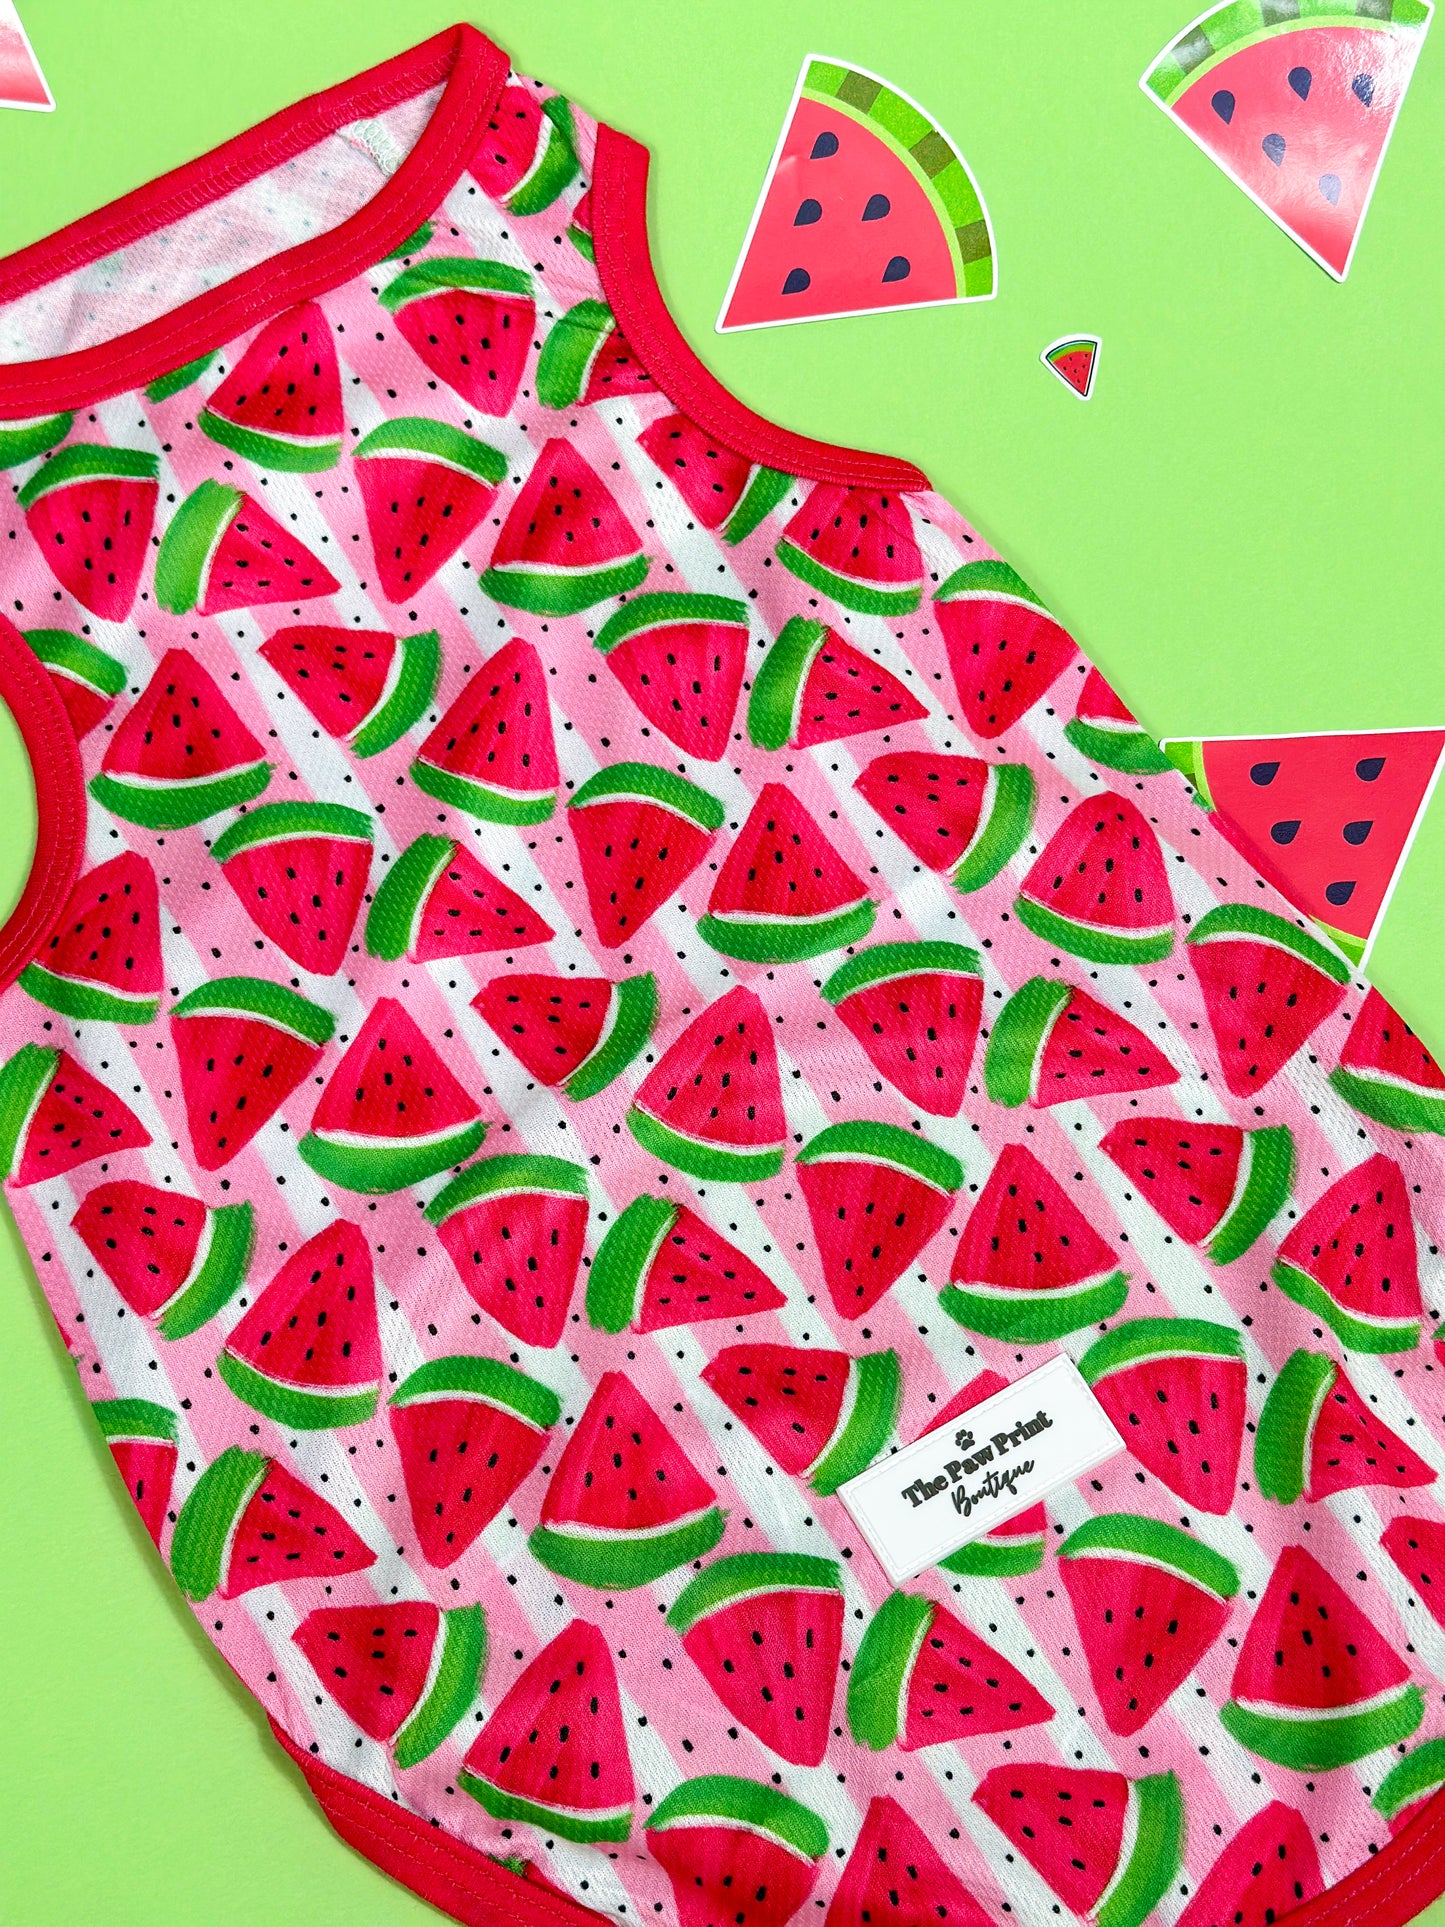 The Watermelon Sugar Cooling Vest